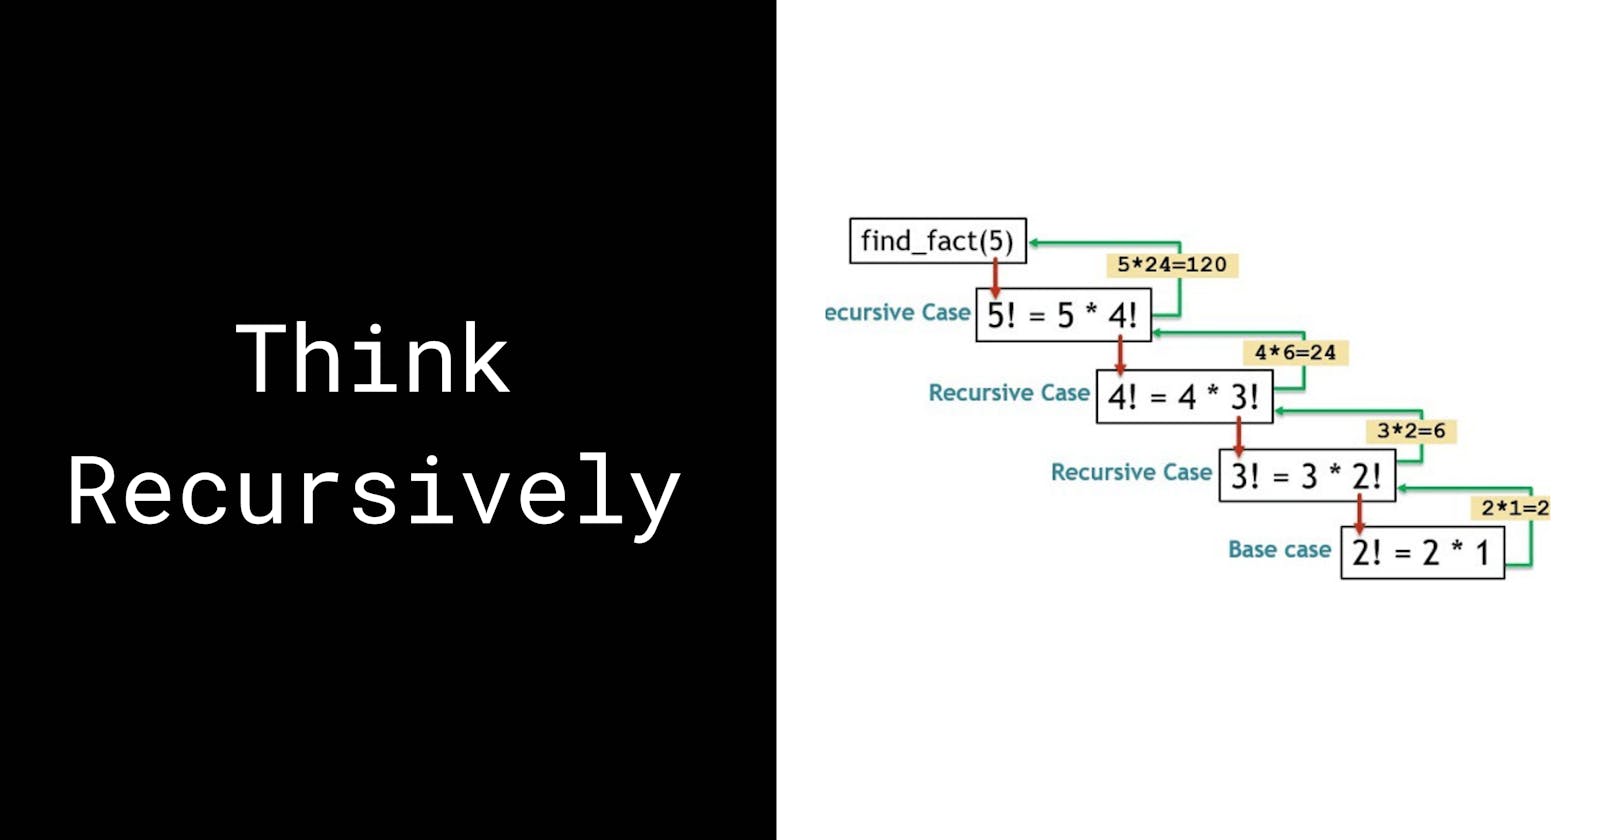 Learn To Think Recursively and Solve Recursion Problems in an Interview in 4 Steps